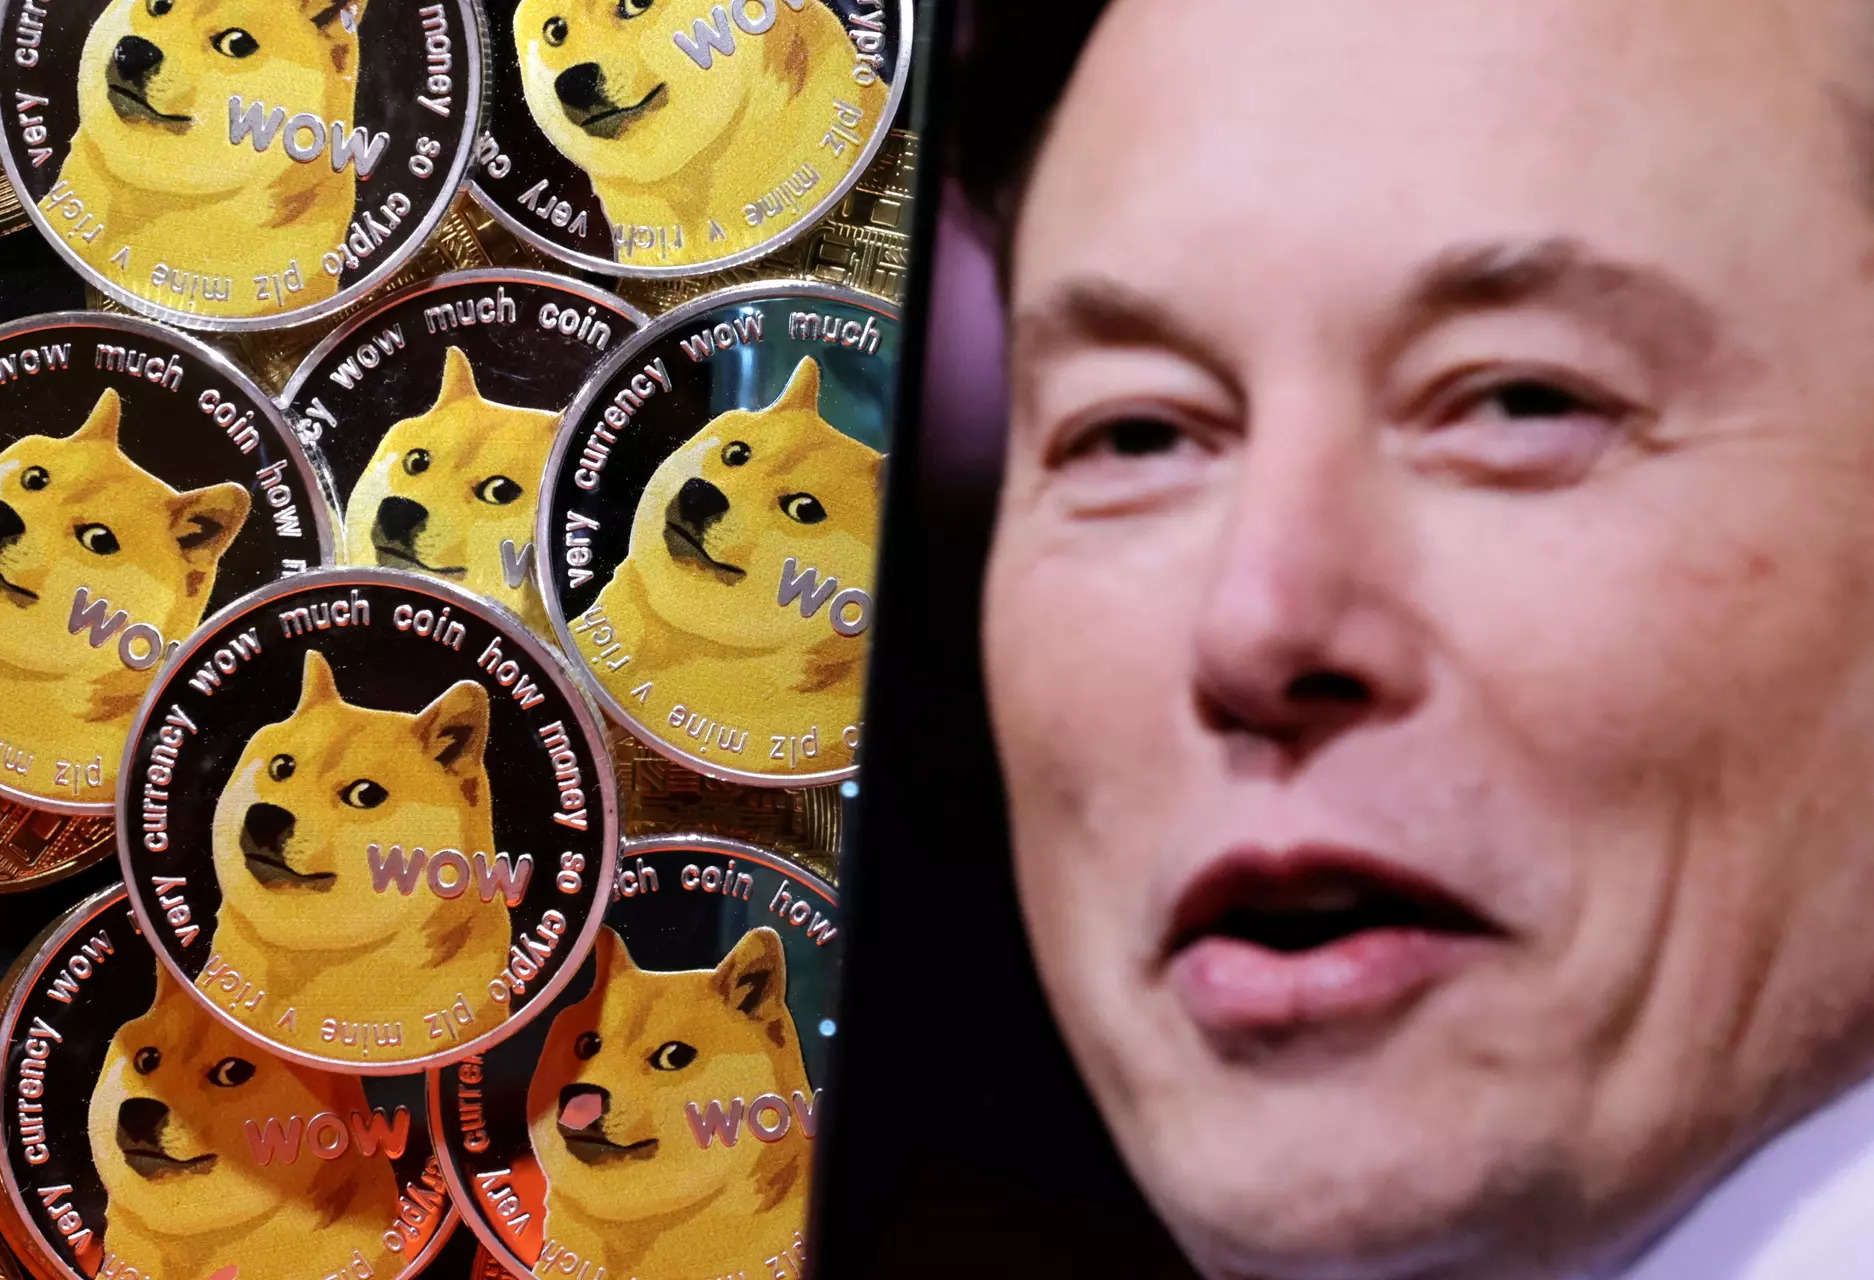 Musk replaces Twitter blue bird logo with Doge meme